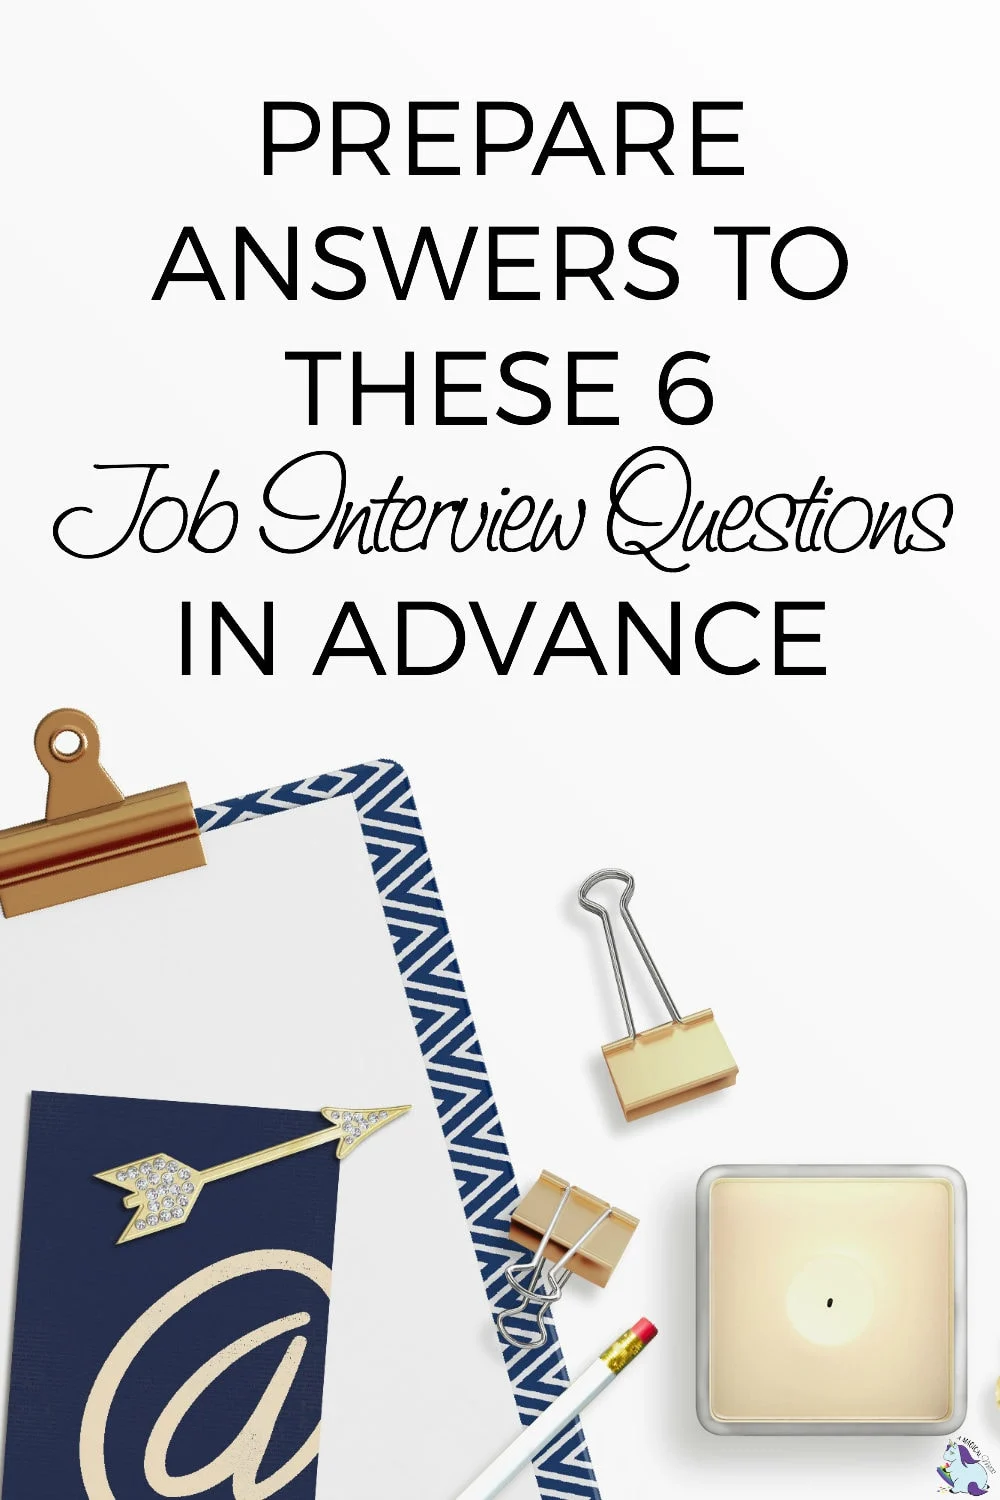 The Big 6 Job Interview Questions You’ll Want to Prepare for in Advance